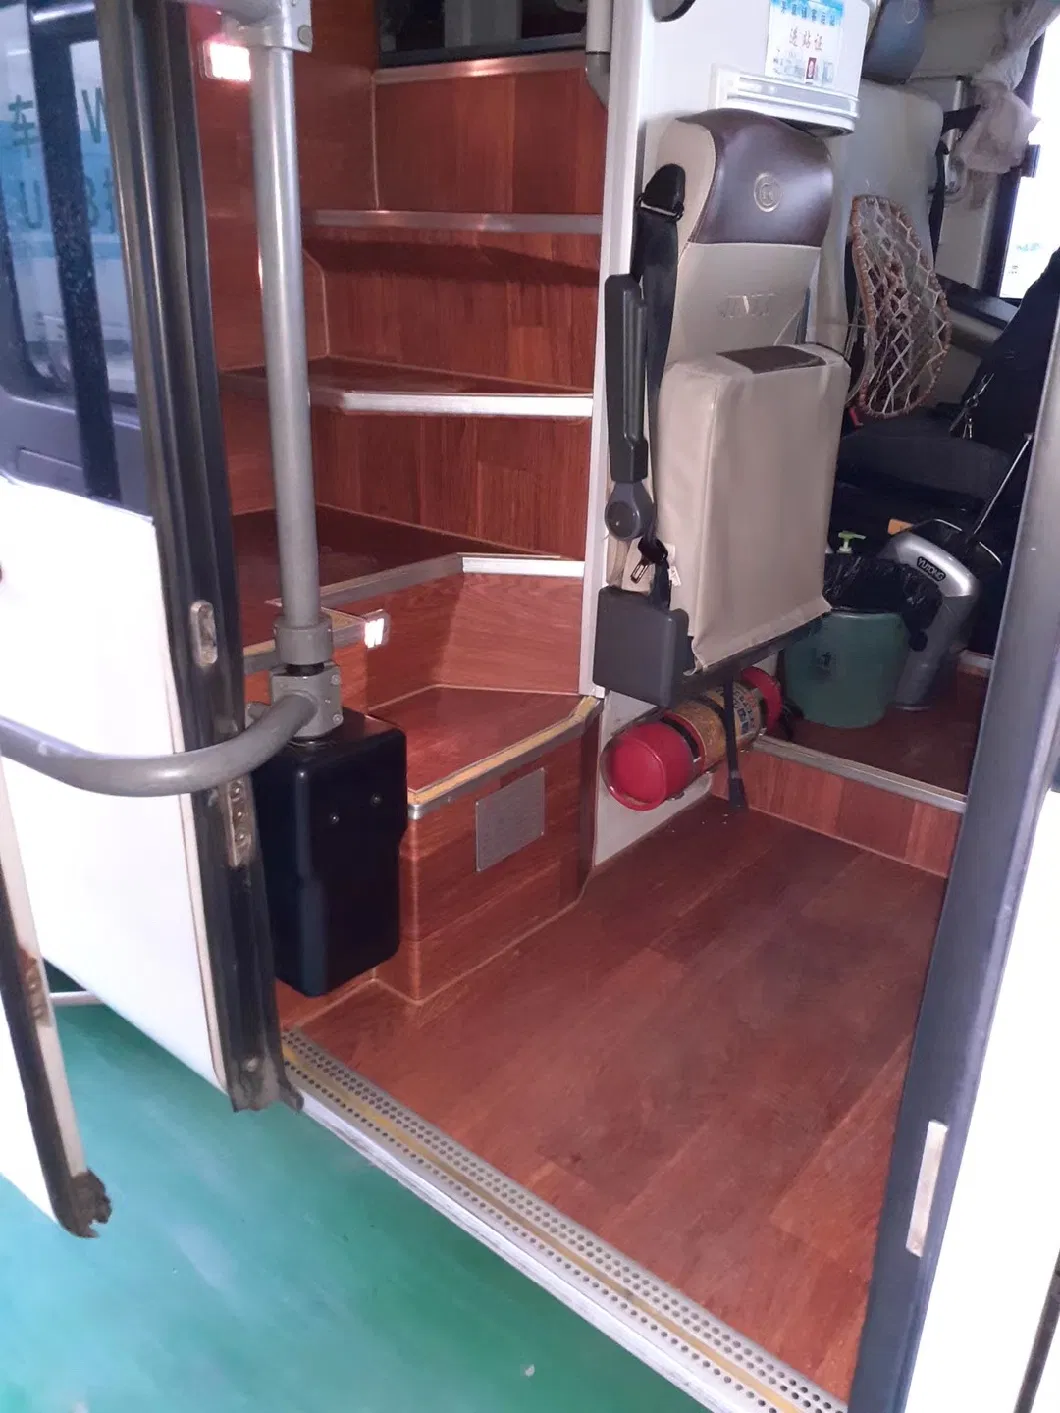 Used Coach Bus with 55 Seats